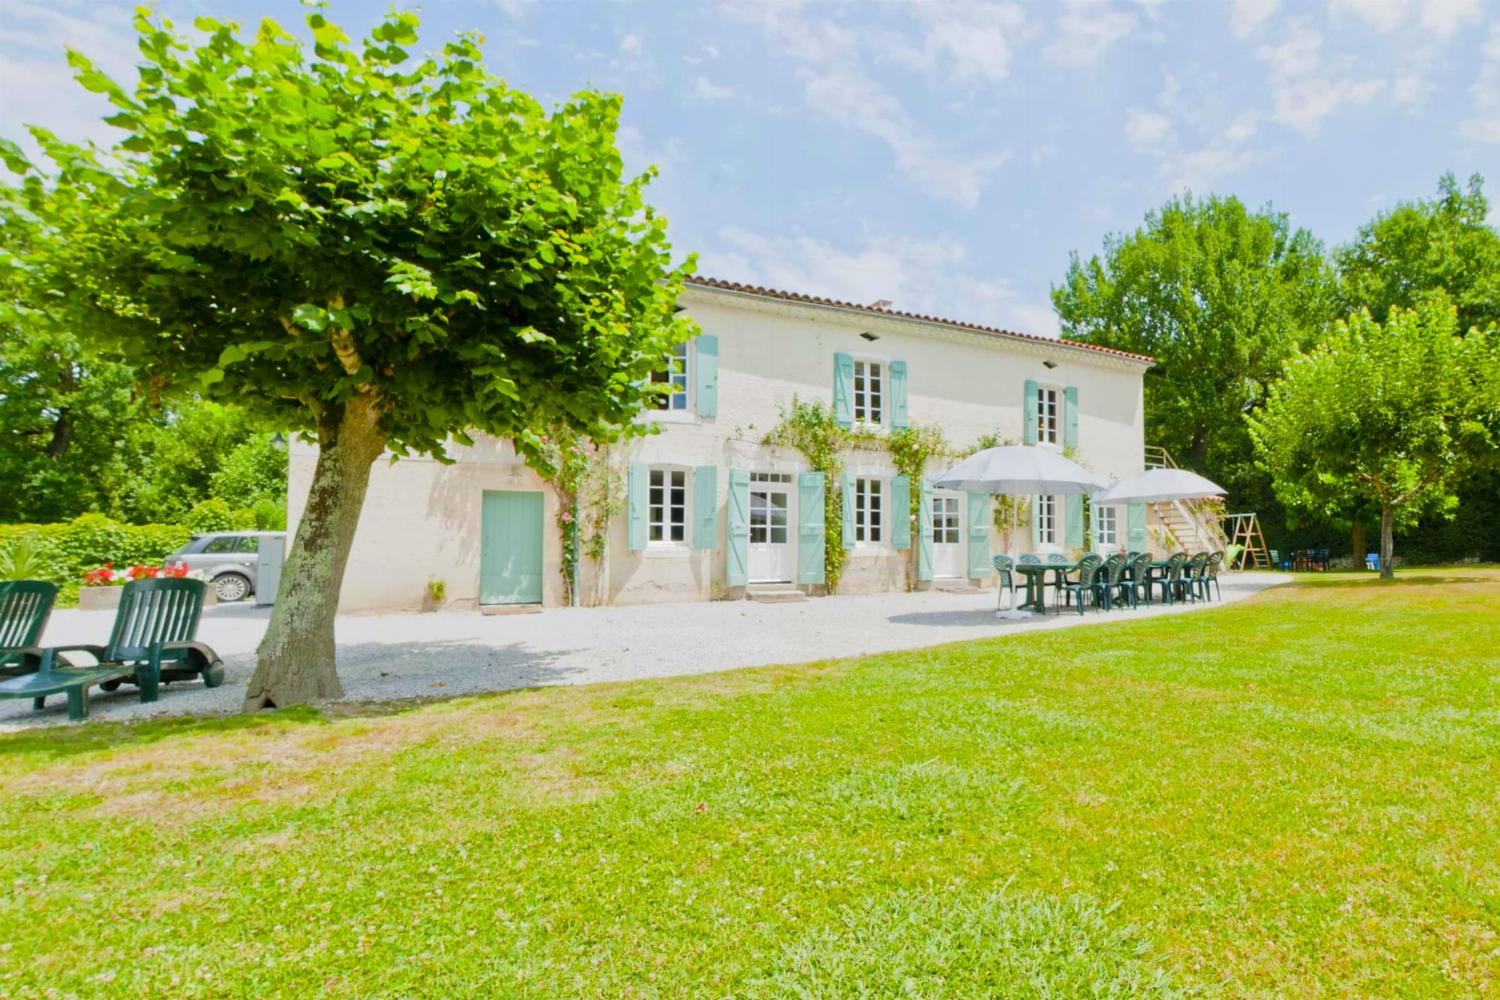 Holiday accommodation in South West France